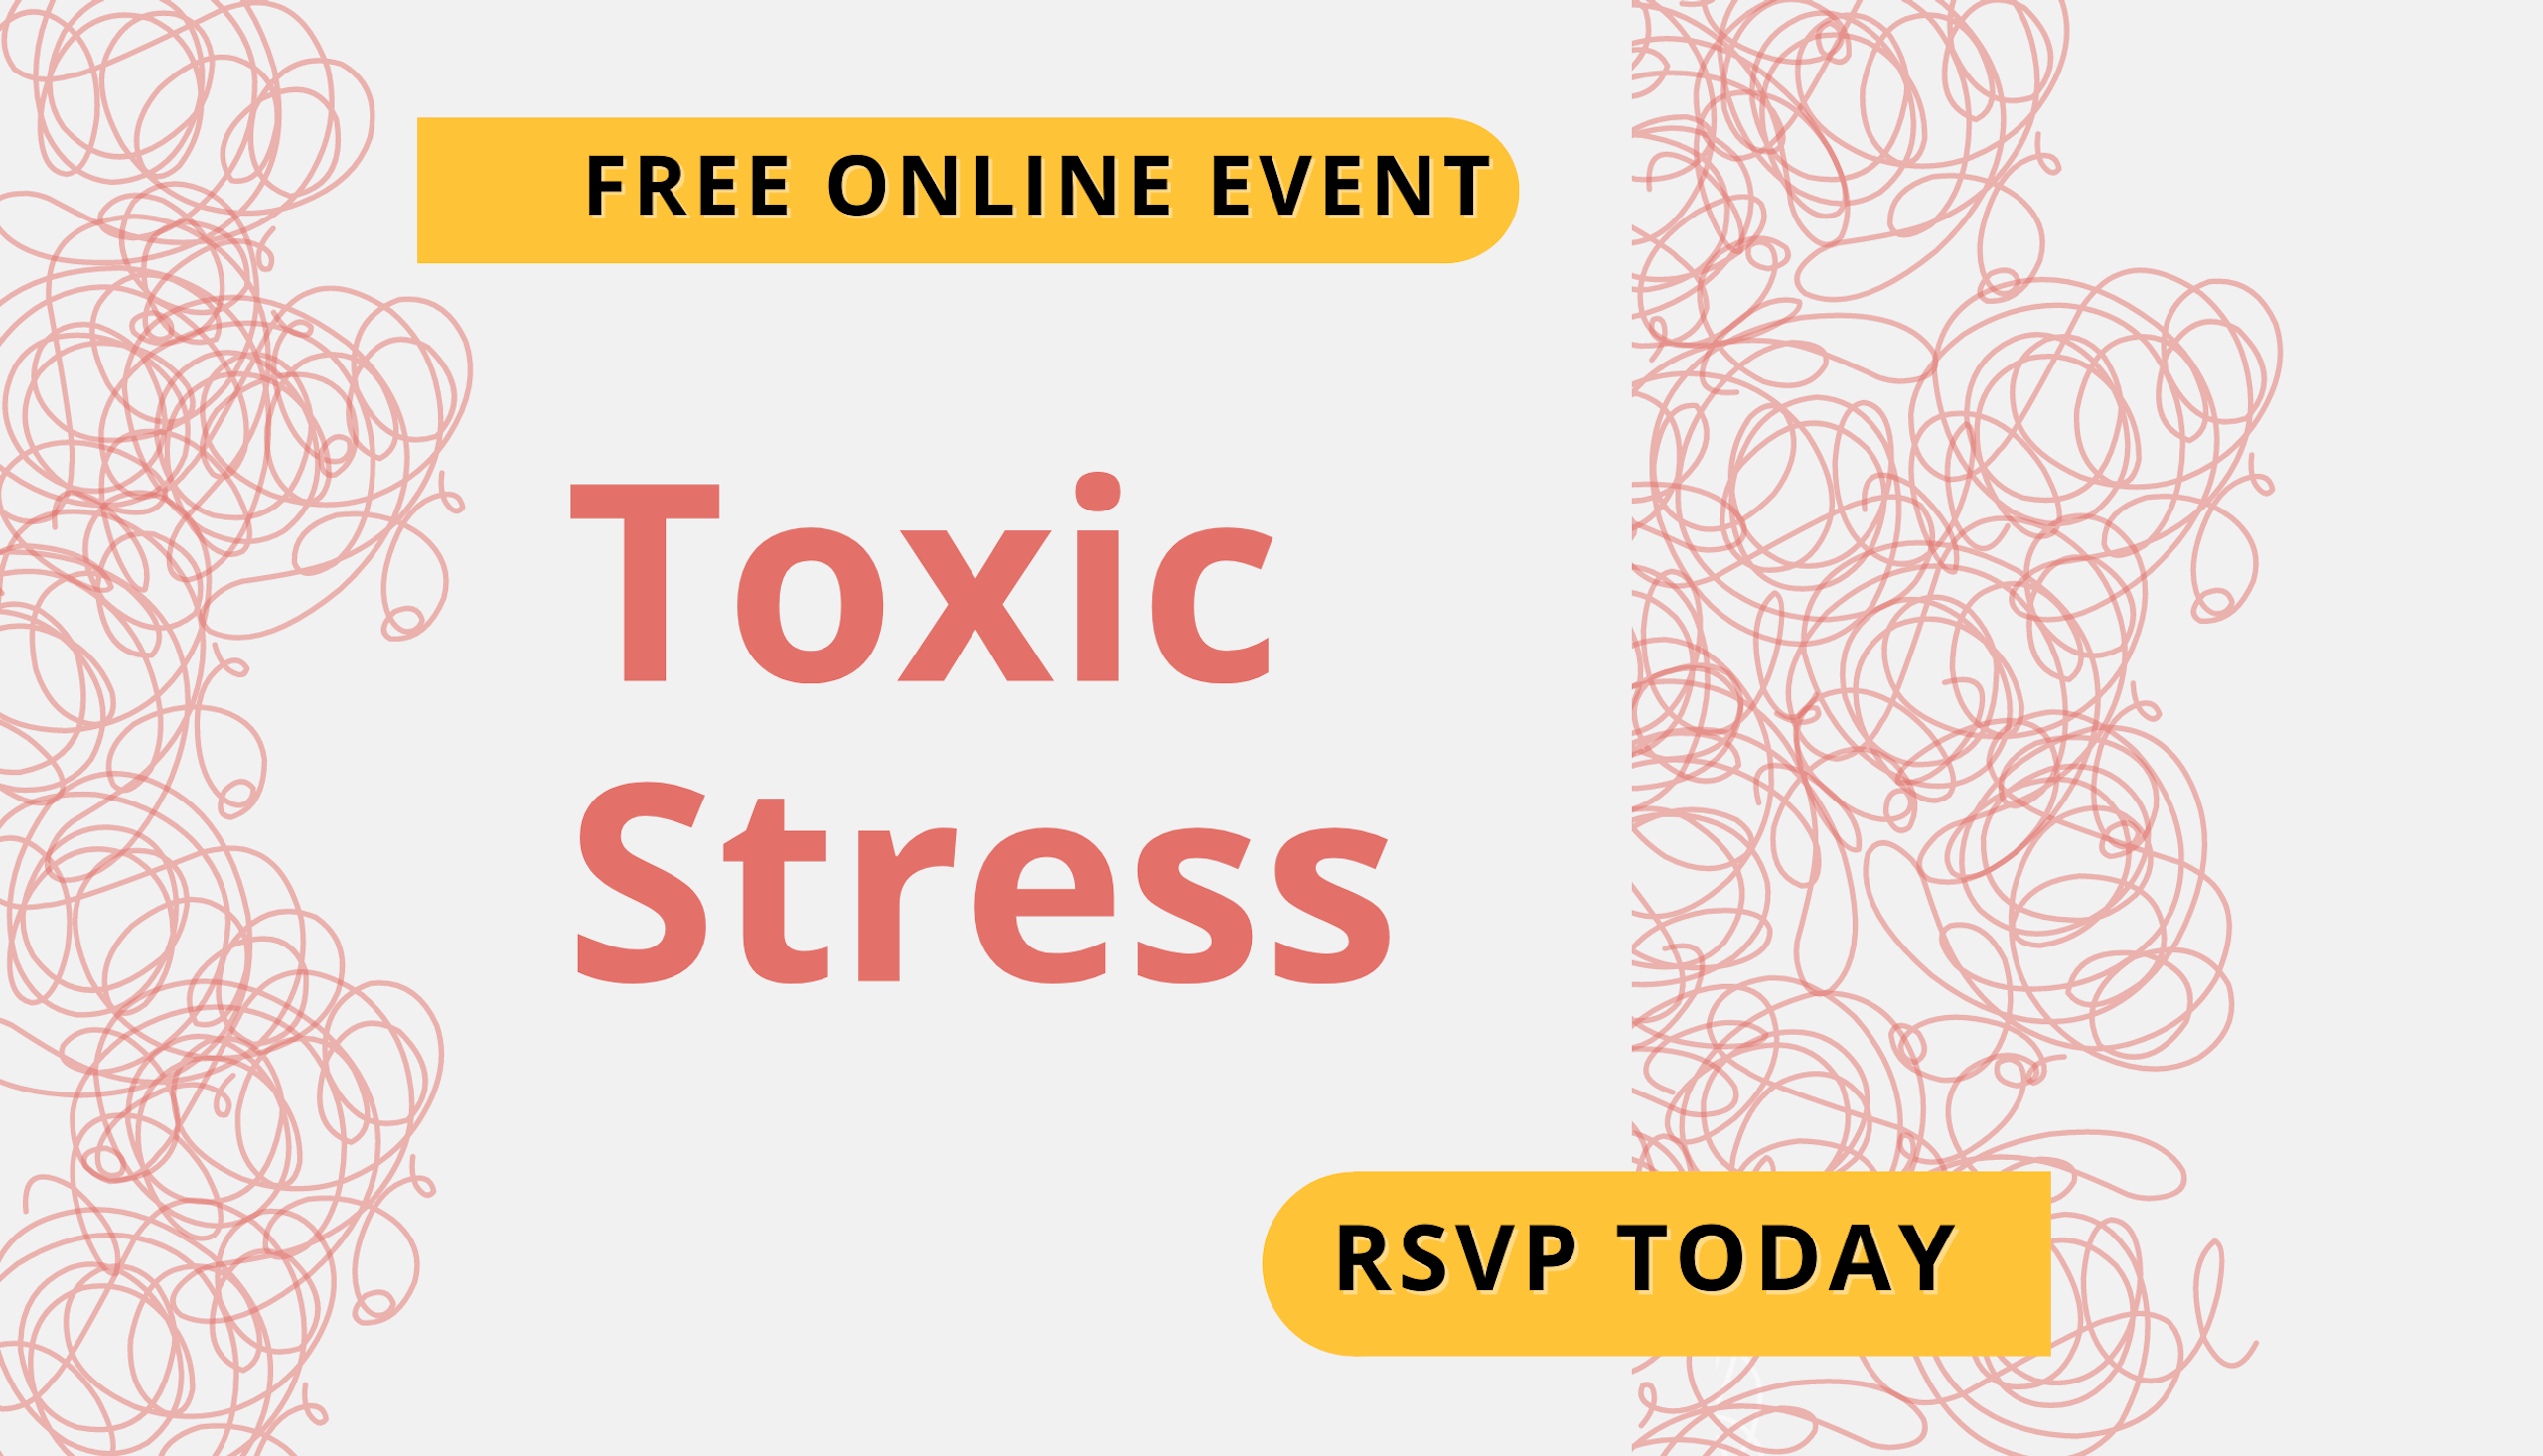 Graphic saying Free online event: Toxic Stress: RSVP TODAY